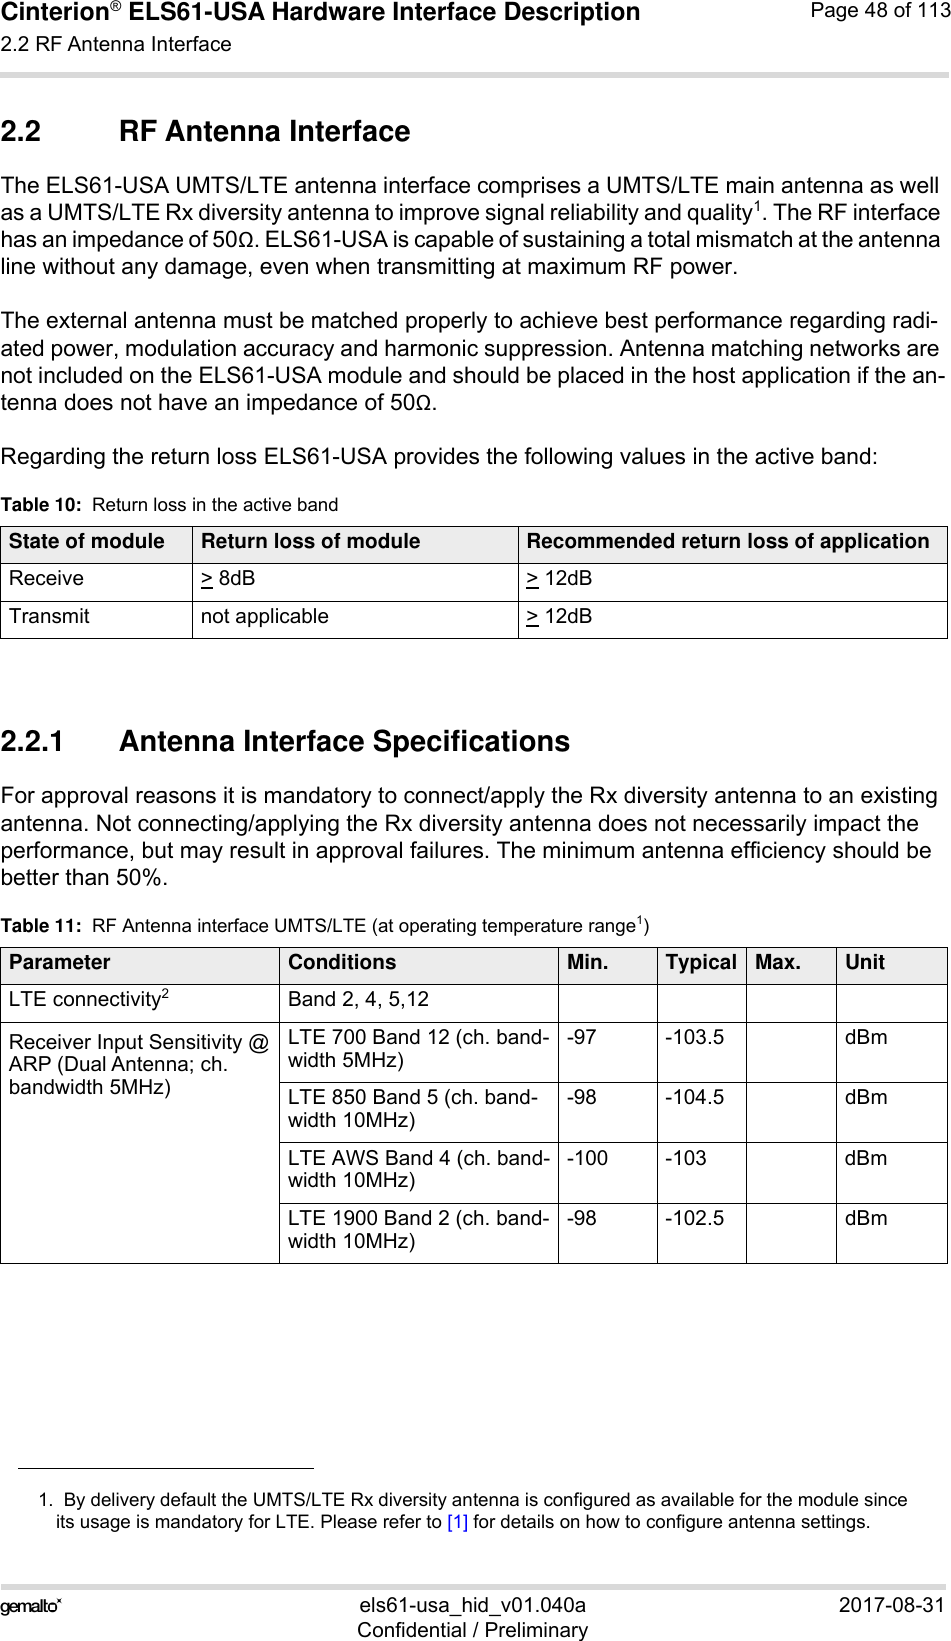 Cinterion® ELS61-USA Hardware Interface Description2.2 RF Antenna Interface59els61-usa_hid_v01.040a 2017-08-31Confidential / PreliminaryPage 48 of 1132.2 RF Antenna InterfaceThe ELS61-USA UMTS/LTE antenna interface comprises a UMTS/LTE main antenna as well as a UMTS/LTE Rx diversity antenna to improve signal reliability and quality1. The RF interface has an impedance of 50. ELS61-USA is capable of sustaining a total mismatch at the antenna line without any damage, even when transmitting at maximum RF power.The external antenna must be matched properly to achieve best performance regarding radi-ated power, modulation accuracy and harmonic suppression. Antenna matching networks are not included on the ELS61-USA module and should be placed in the host application if the an-tenna does not have an impedance of 50.Regarding the return loss ELS61-USA provides the following values in the active band:2.2.1 Antenna Interface SpecificationsFor approval reasons it is mandatory to connect/apply the Rx diversity antenna to an existing antenna. Not connecting/applying the Rx diversity antenna does not necessarily impact the performance, but may result in approval failures. The minimum antenna efficiency should be better than 50%. 1.  By delivery default the UMTS/LTE Rx diversity antenna is configured as available for the module sinceits usage is mandatory for LTE. Please refer to [1] for details on how to configure antenna settings.Table 10:  Return loss in the active bandState of module Return loss of module Recommended return loss of applicationReceive &gt; 8dB &gt; 12dBTransmit not applicable  &gt; 12dBTable 11:  RF Antenna interface UMTS/LTE (at operating temperature range1)Parameter Conditions Min. Typical Max. UnitLTE connectivity2Band 2, 4, 5,12Receiver Input Sensitivity @ARP (Dual Antenna; ch. bandwidth 5MHz)LTE 700 Band 12 (ch. band-width 5MHz)-97 -103.5 dBmLTE 850 Band 5 (ch. band-width 10MHz)-98 -104.5 dBmLTE AWS Band 4 (ch. band-width 10MHz)-100 -103 dBmLTE 1900 Band 2 (ch. band-width 10MHz) -98 -102.5 dBm